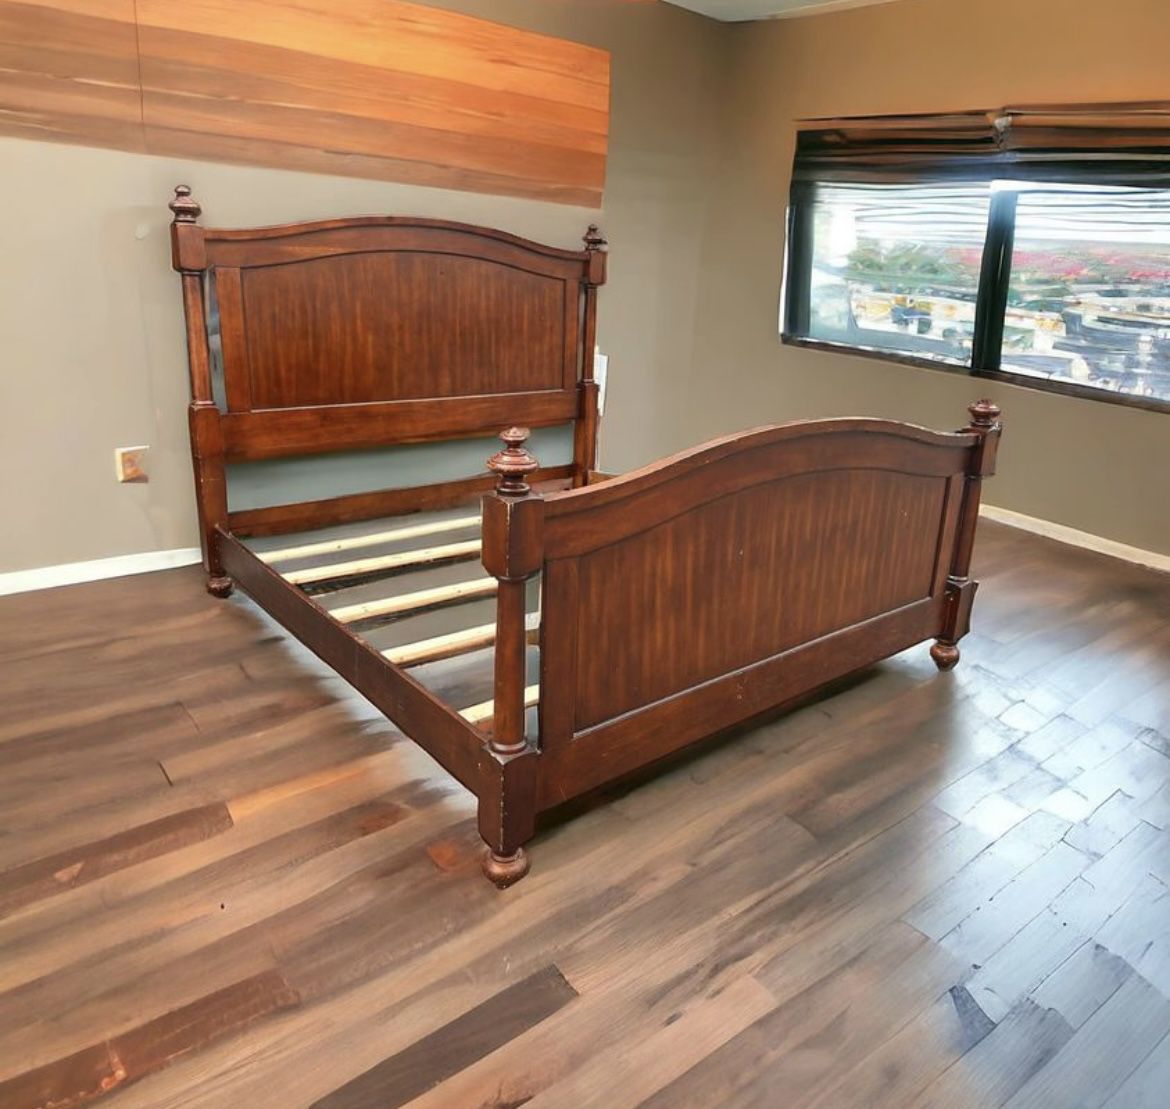 $60 for (1) Low Four-Poster Wood King Bed Frame